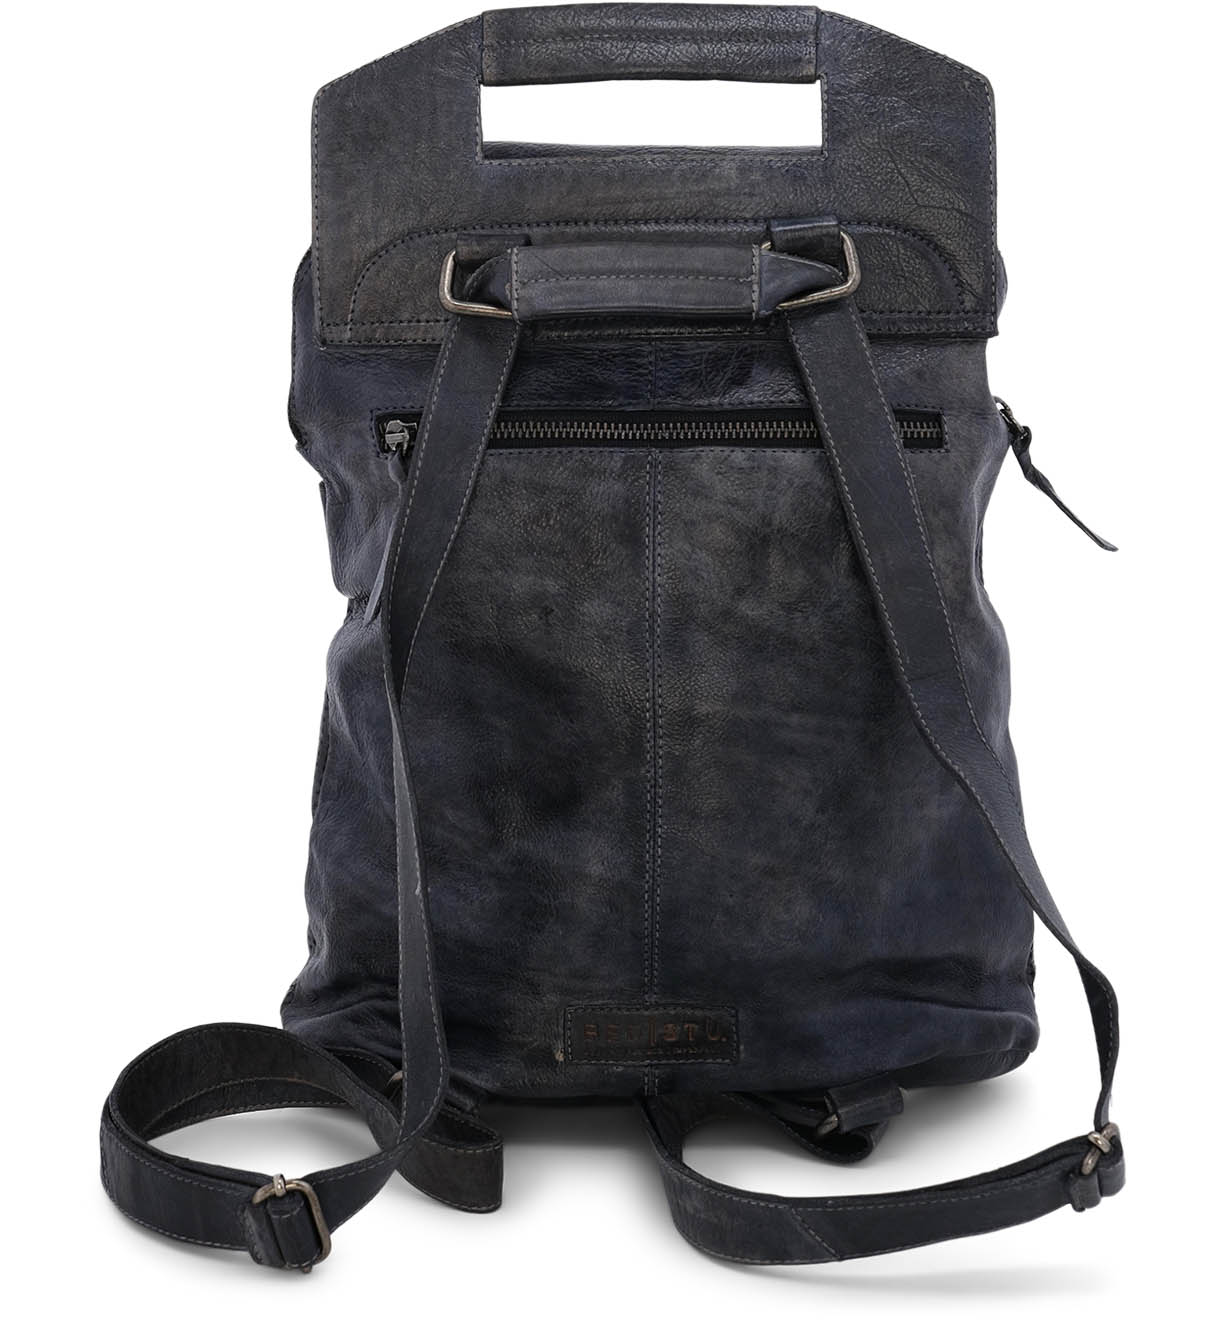 A blue leather Patsy backpack with straps and a shoulder strap from Bed Stu.